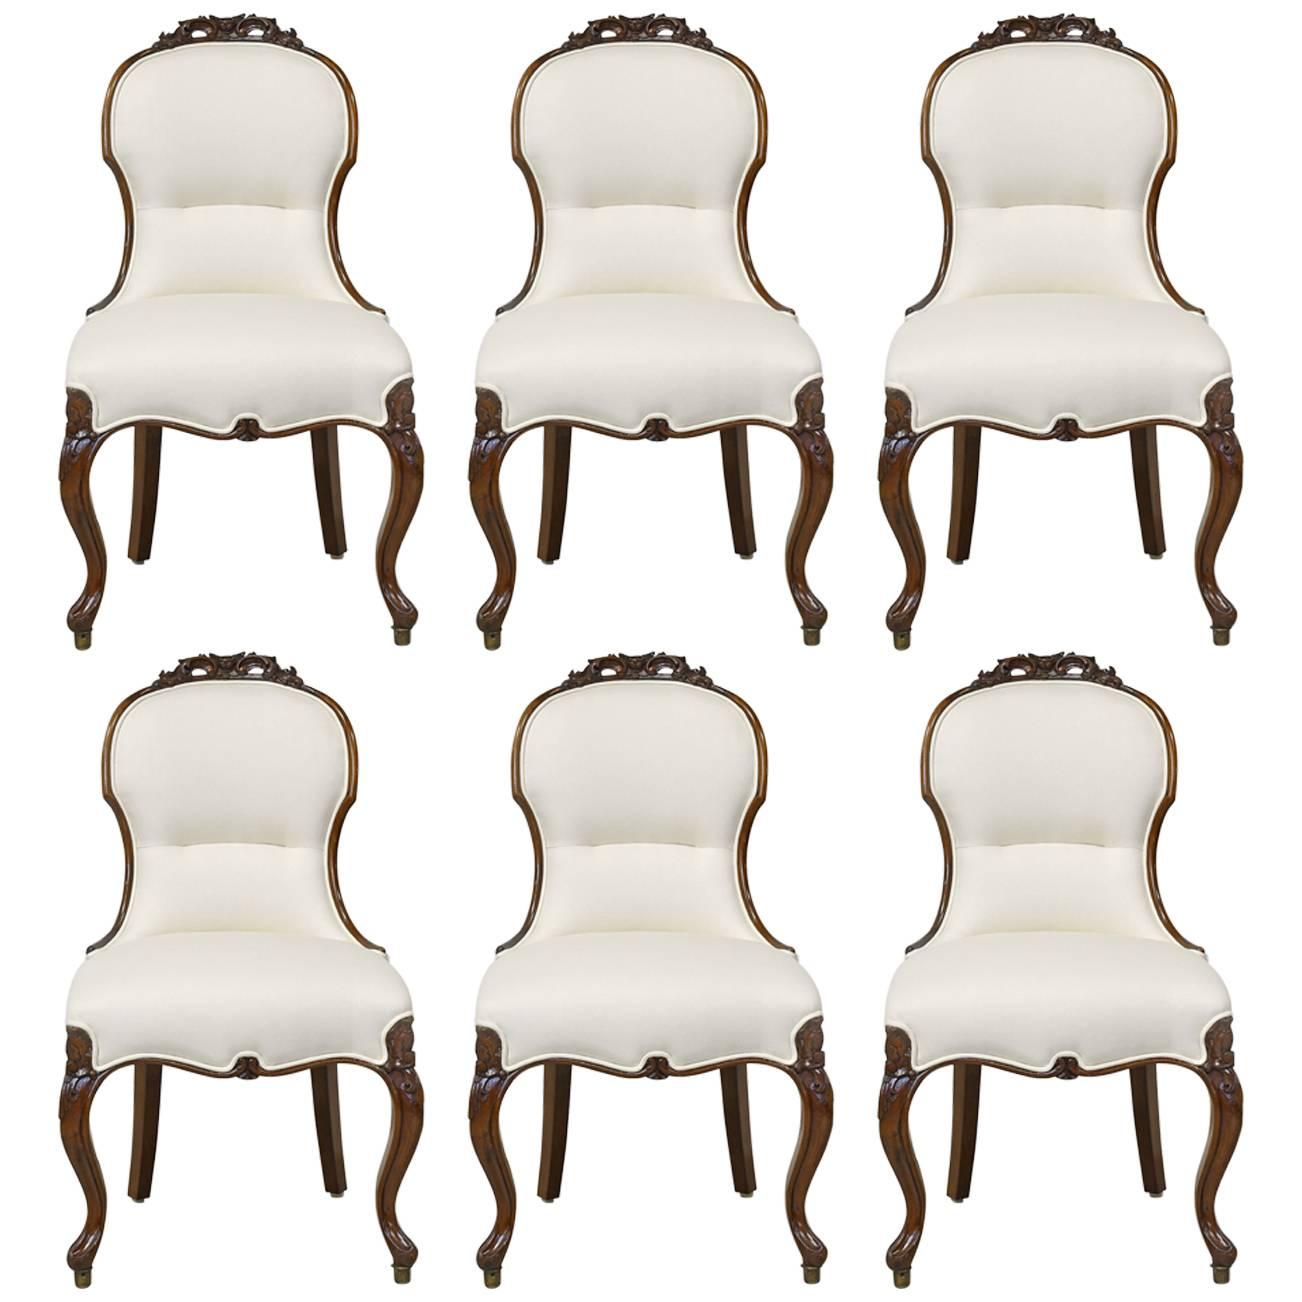 Set of Six Mid-19th Century Dining Chairs with Upholstered Seat and Back